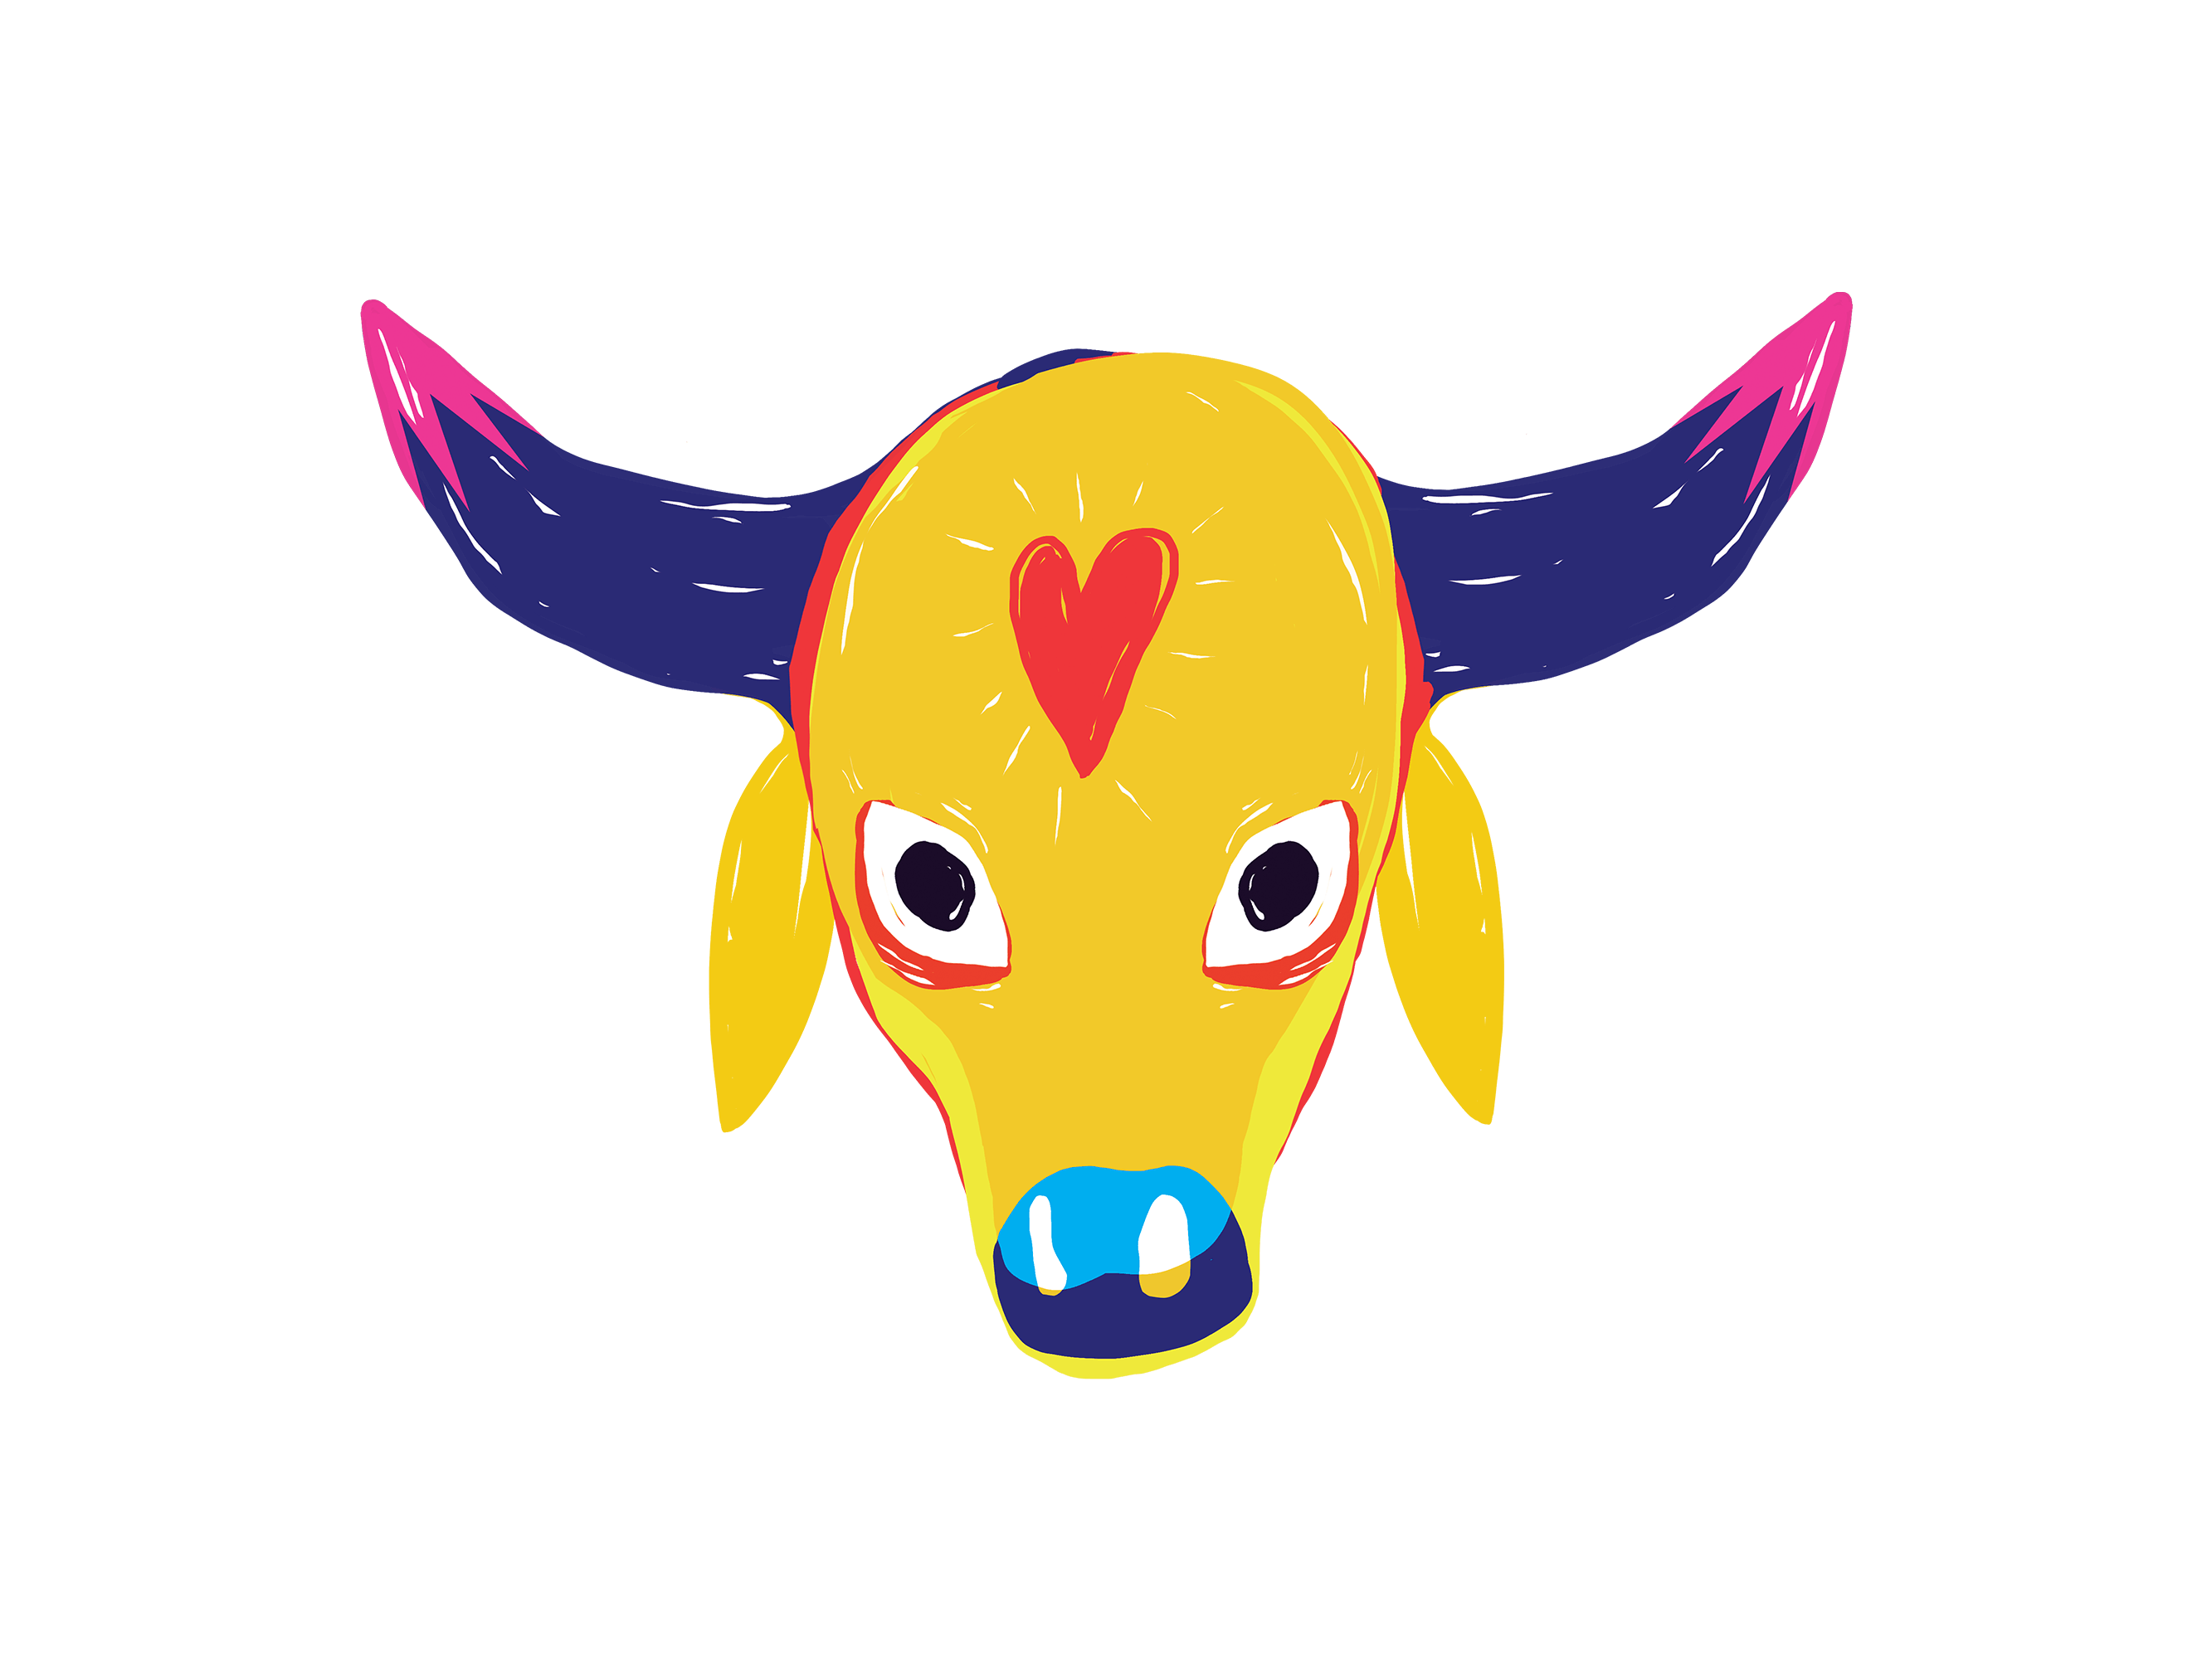 a yellow creature with a heart in the middle of his forehead and purple ears.